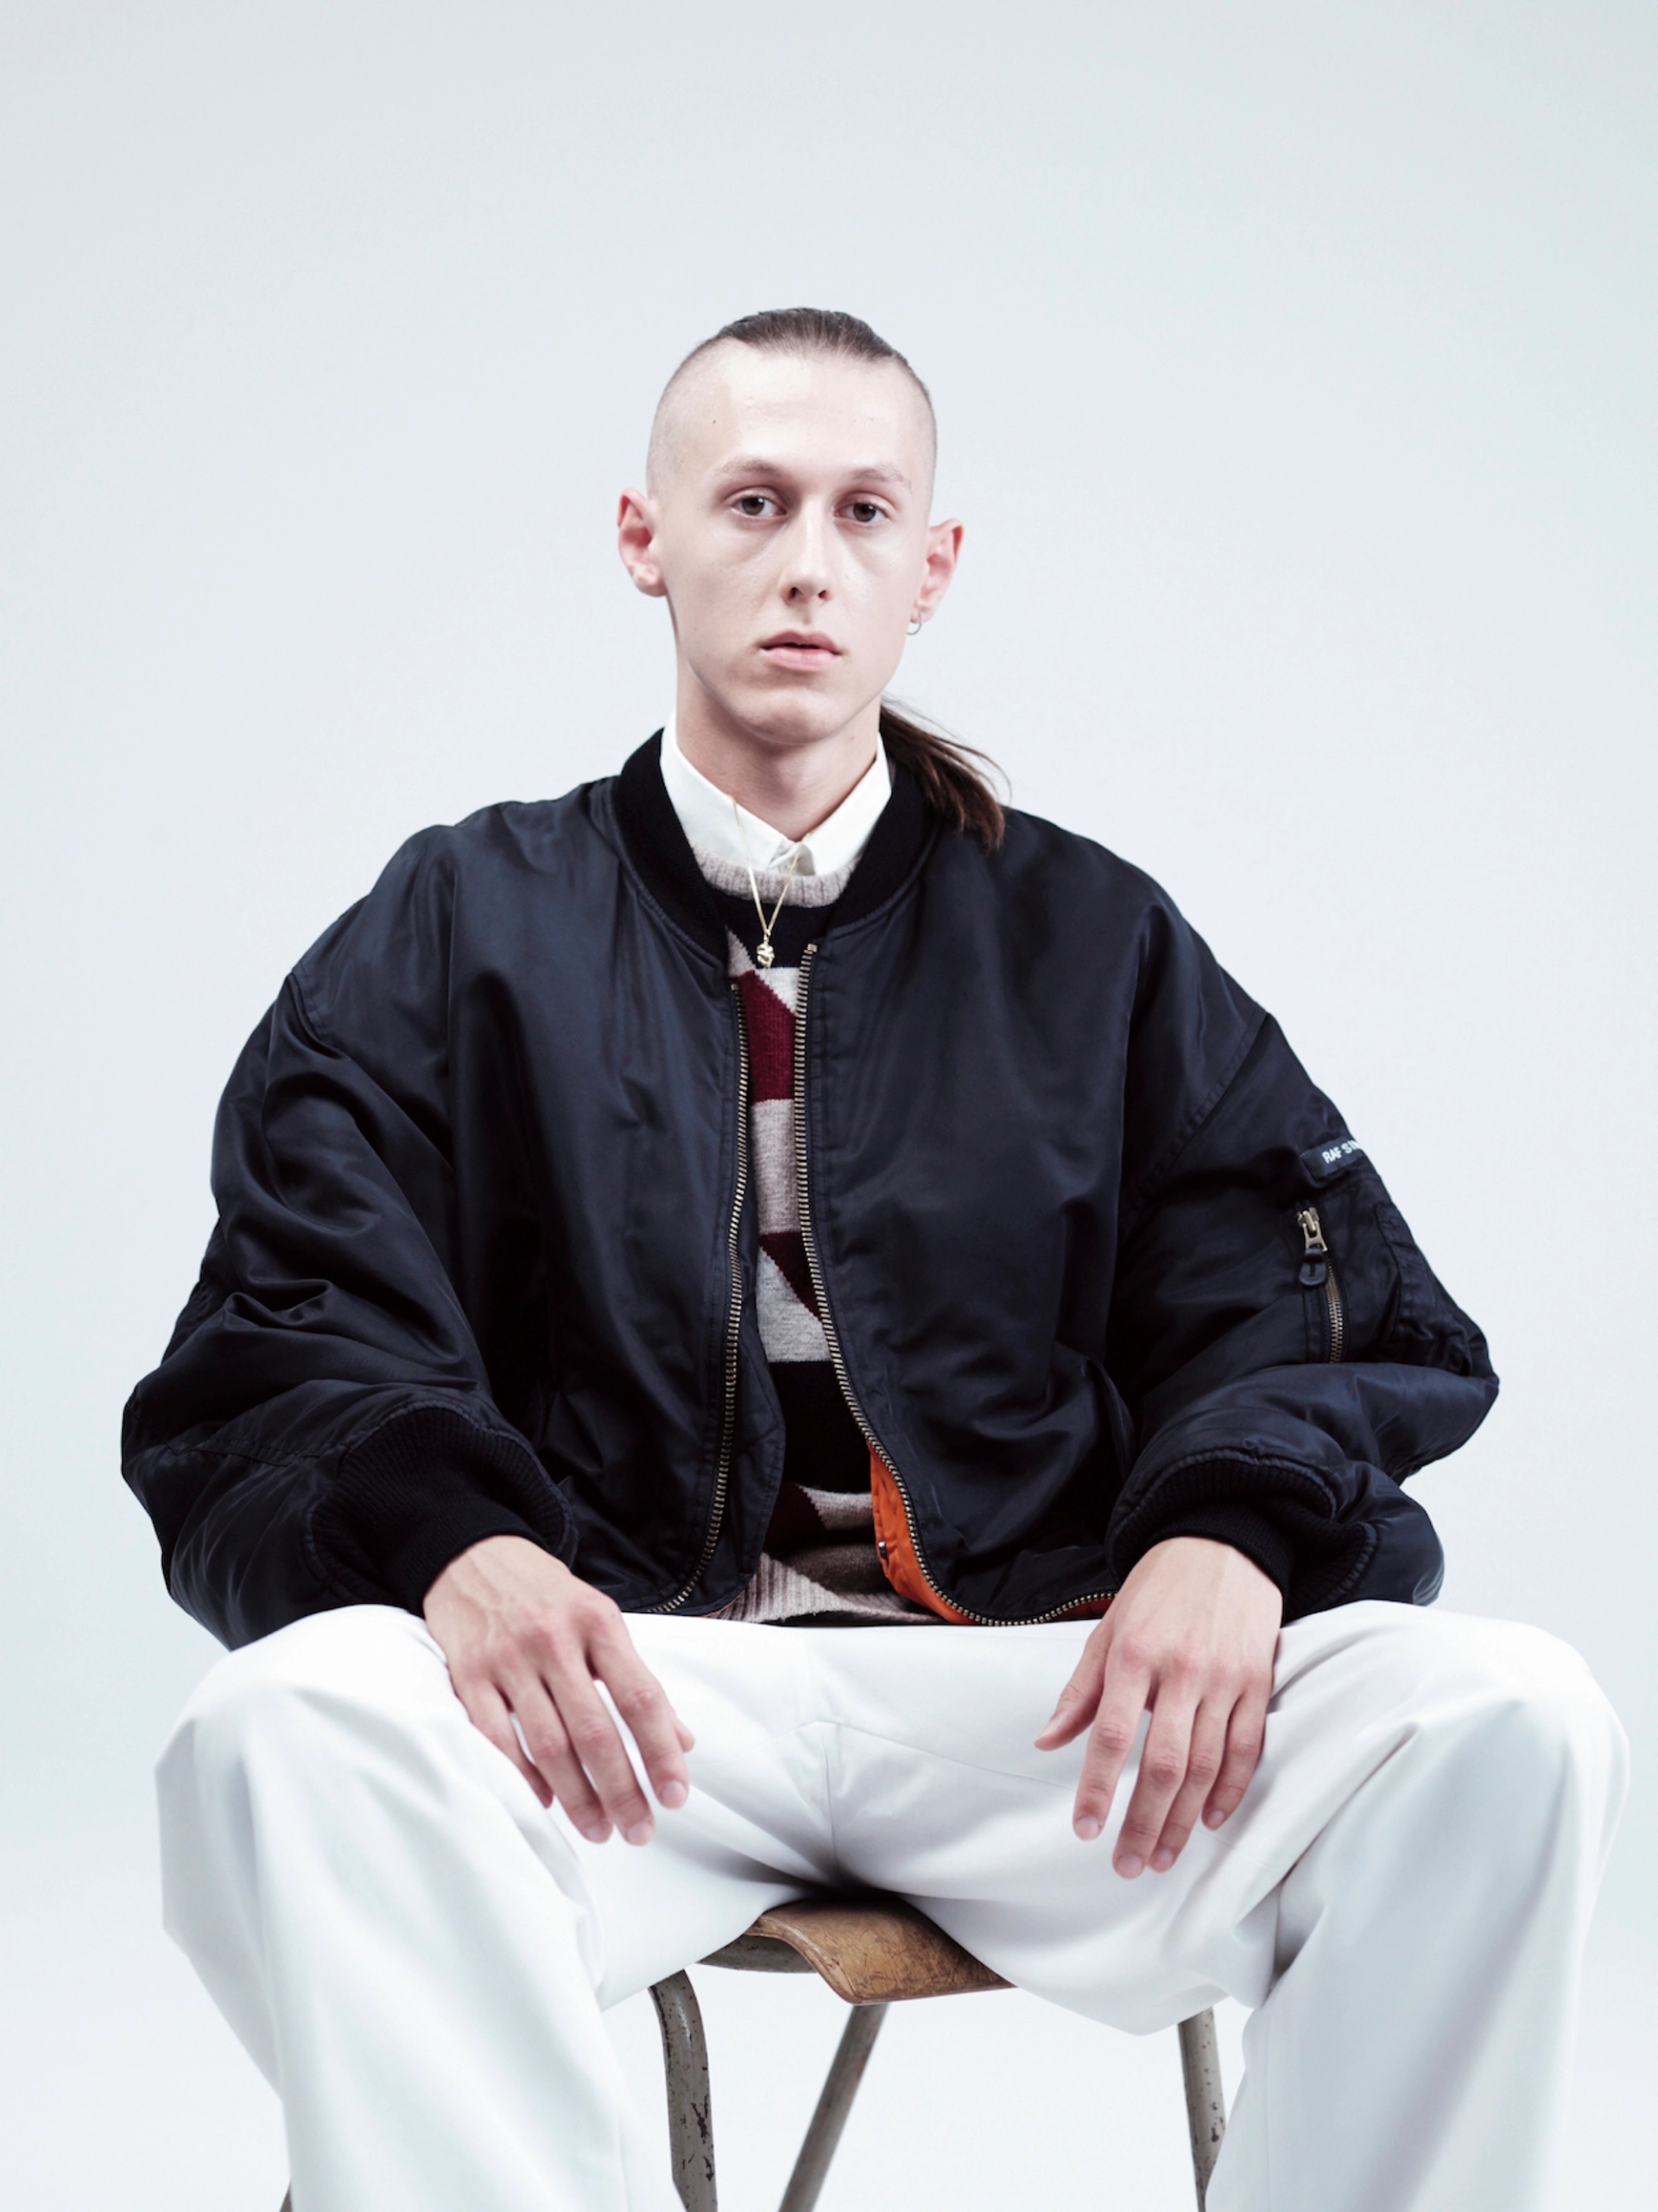 LUKAS: nylon bomber jacket, wool jacquard sweater, cotton shirt, polyester track pants: RAF SIMONS S/S 2000; gold necklace with gold skull pendant and silver earring: RAF SIMONS A/W 2003/2004